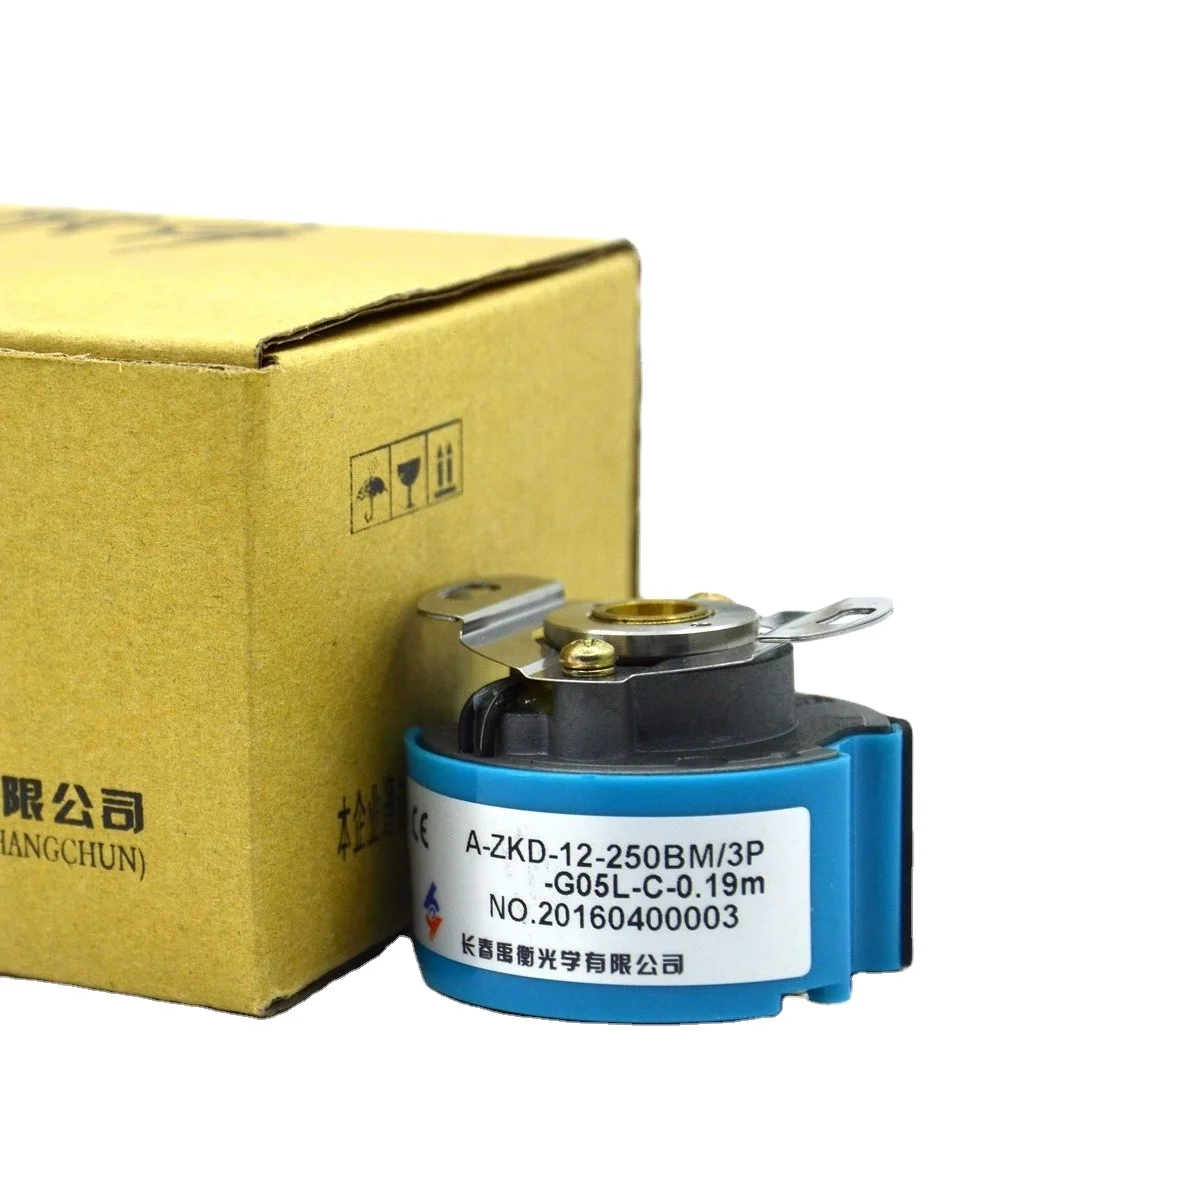 

A-ZKD-12-250BM/5P-G05L-C YUHENG Hollow shaft servo motor encoder New original genuine goods are available from stock